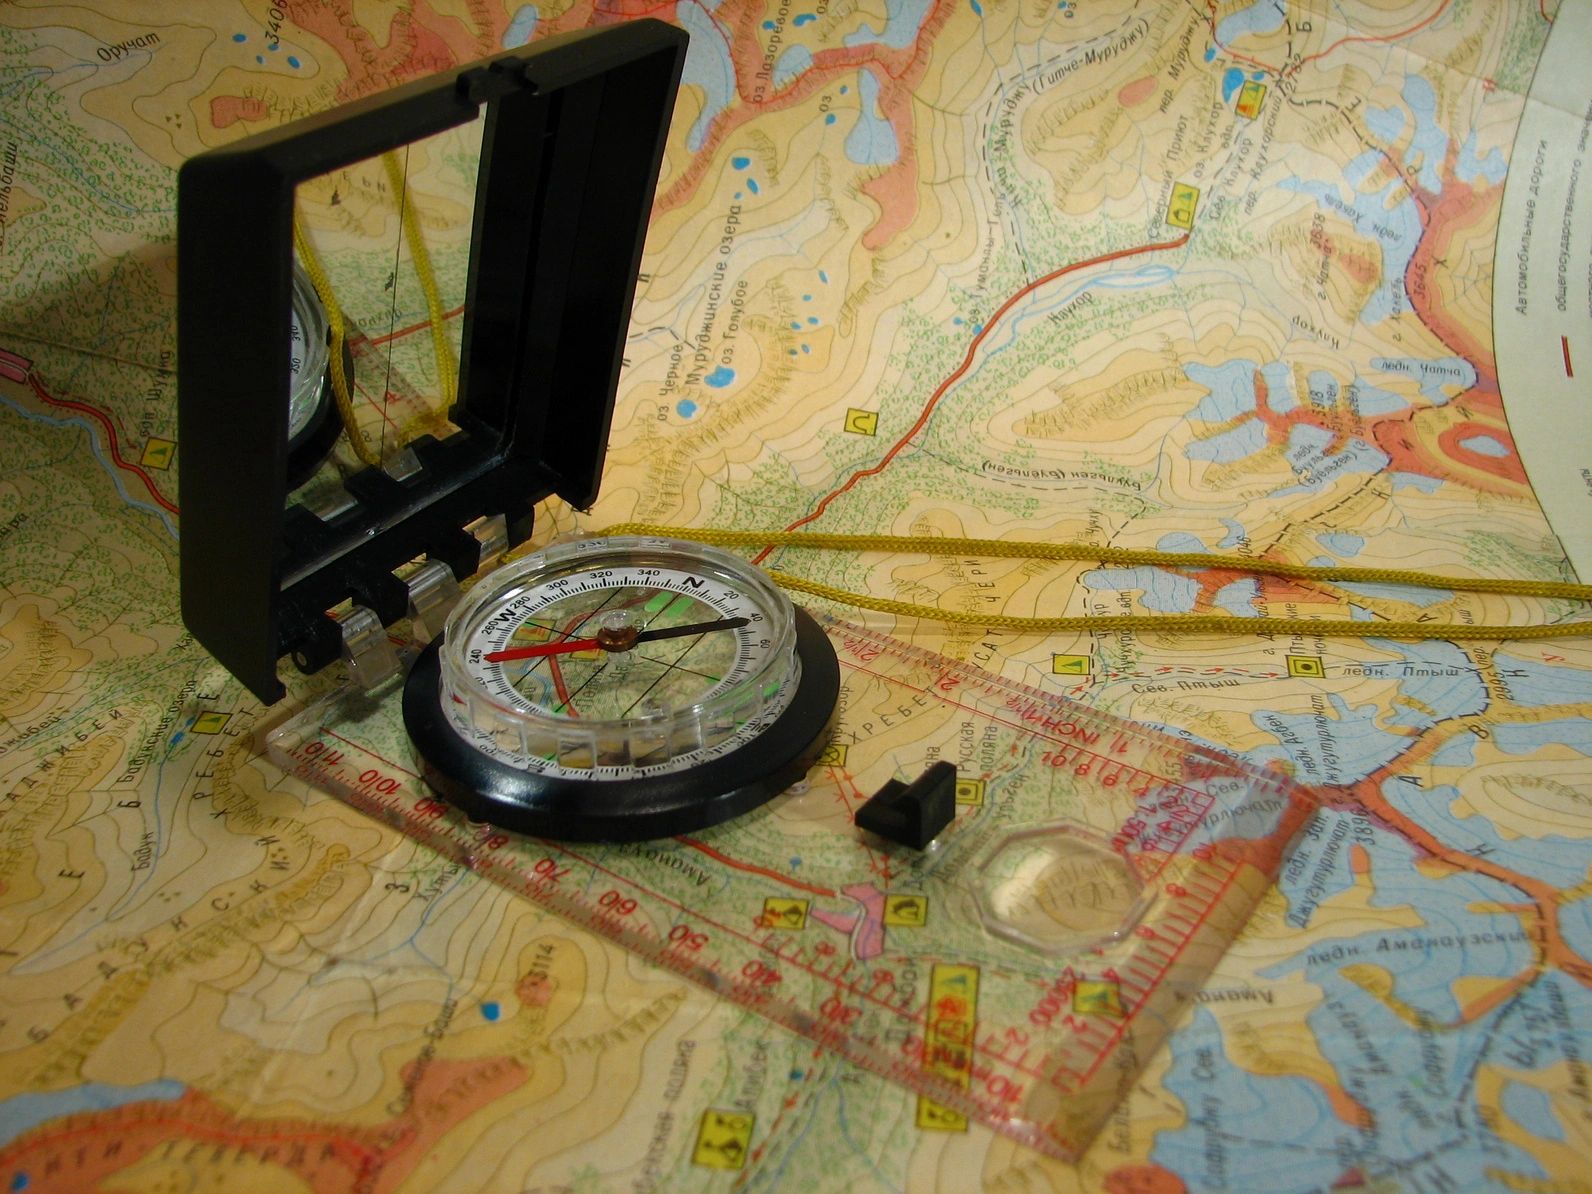 Road map and compass